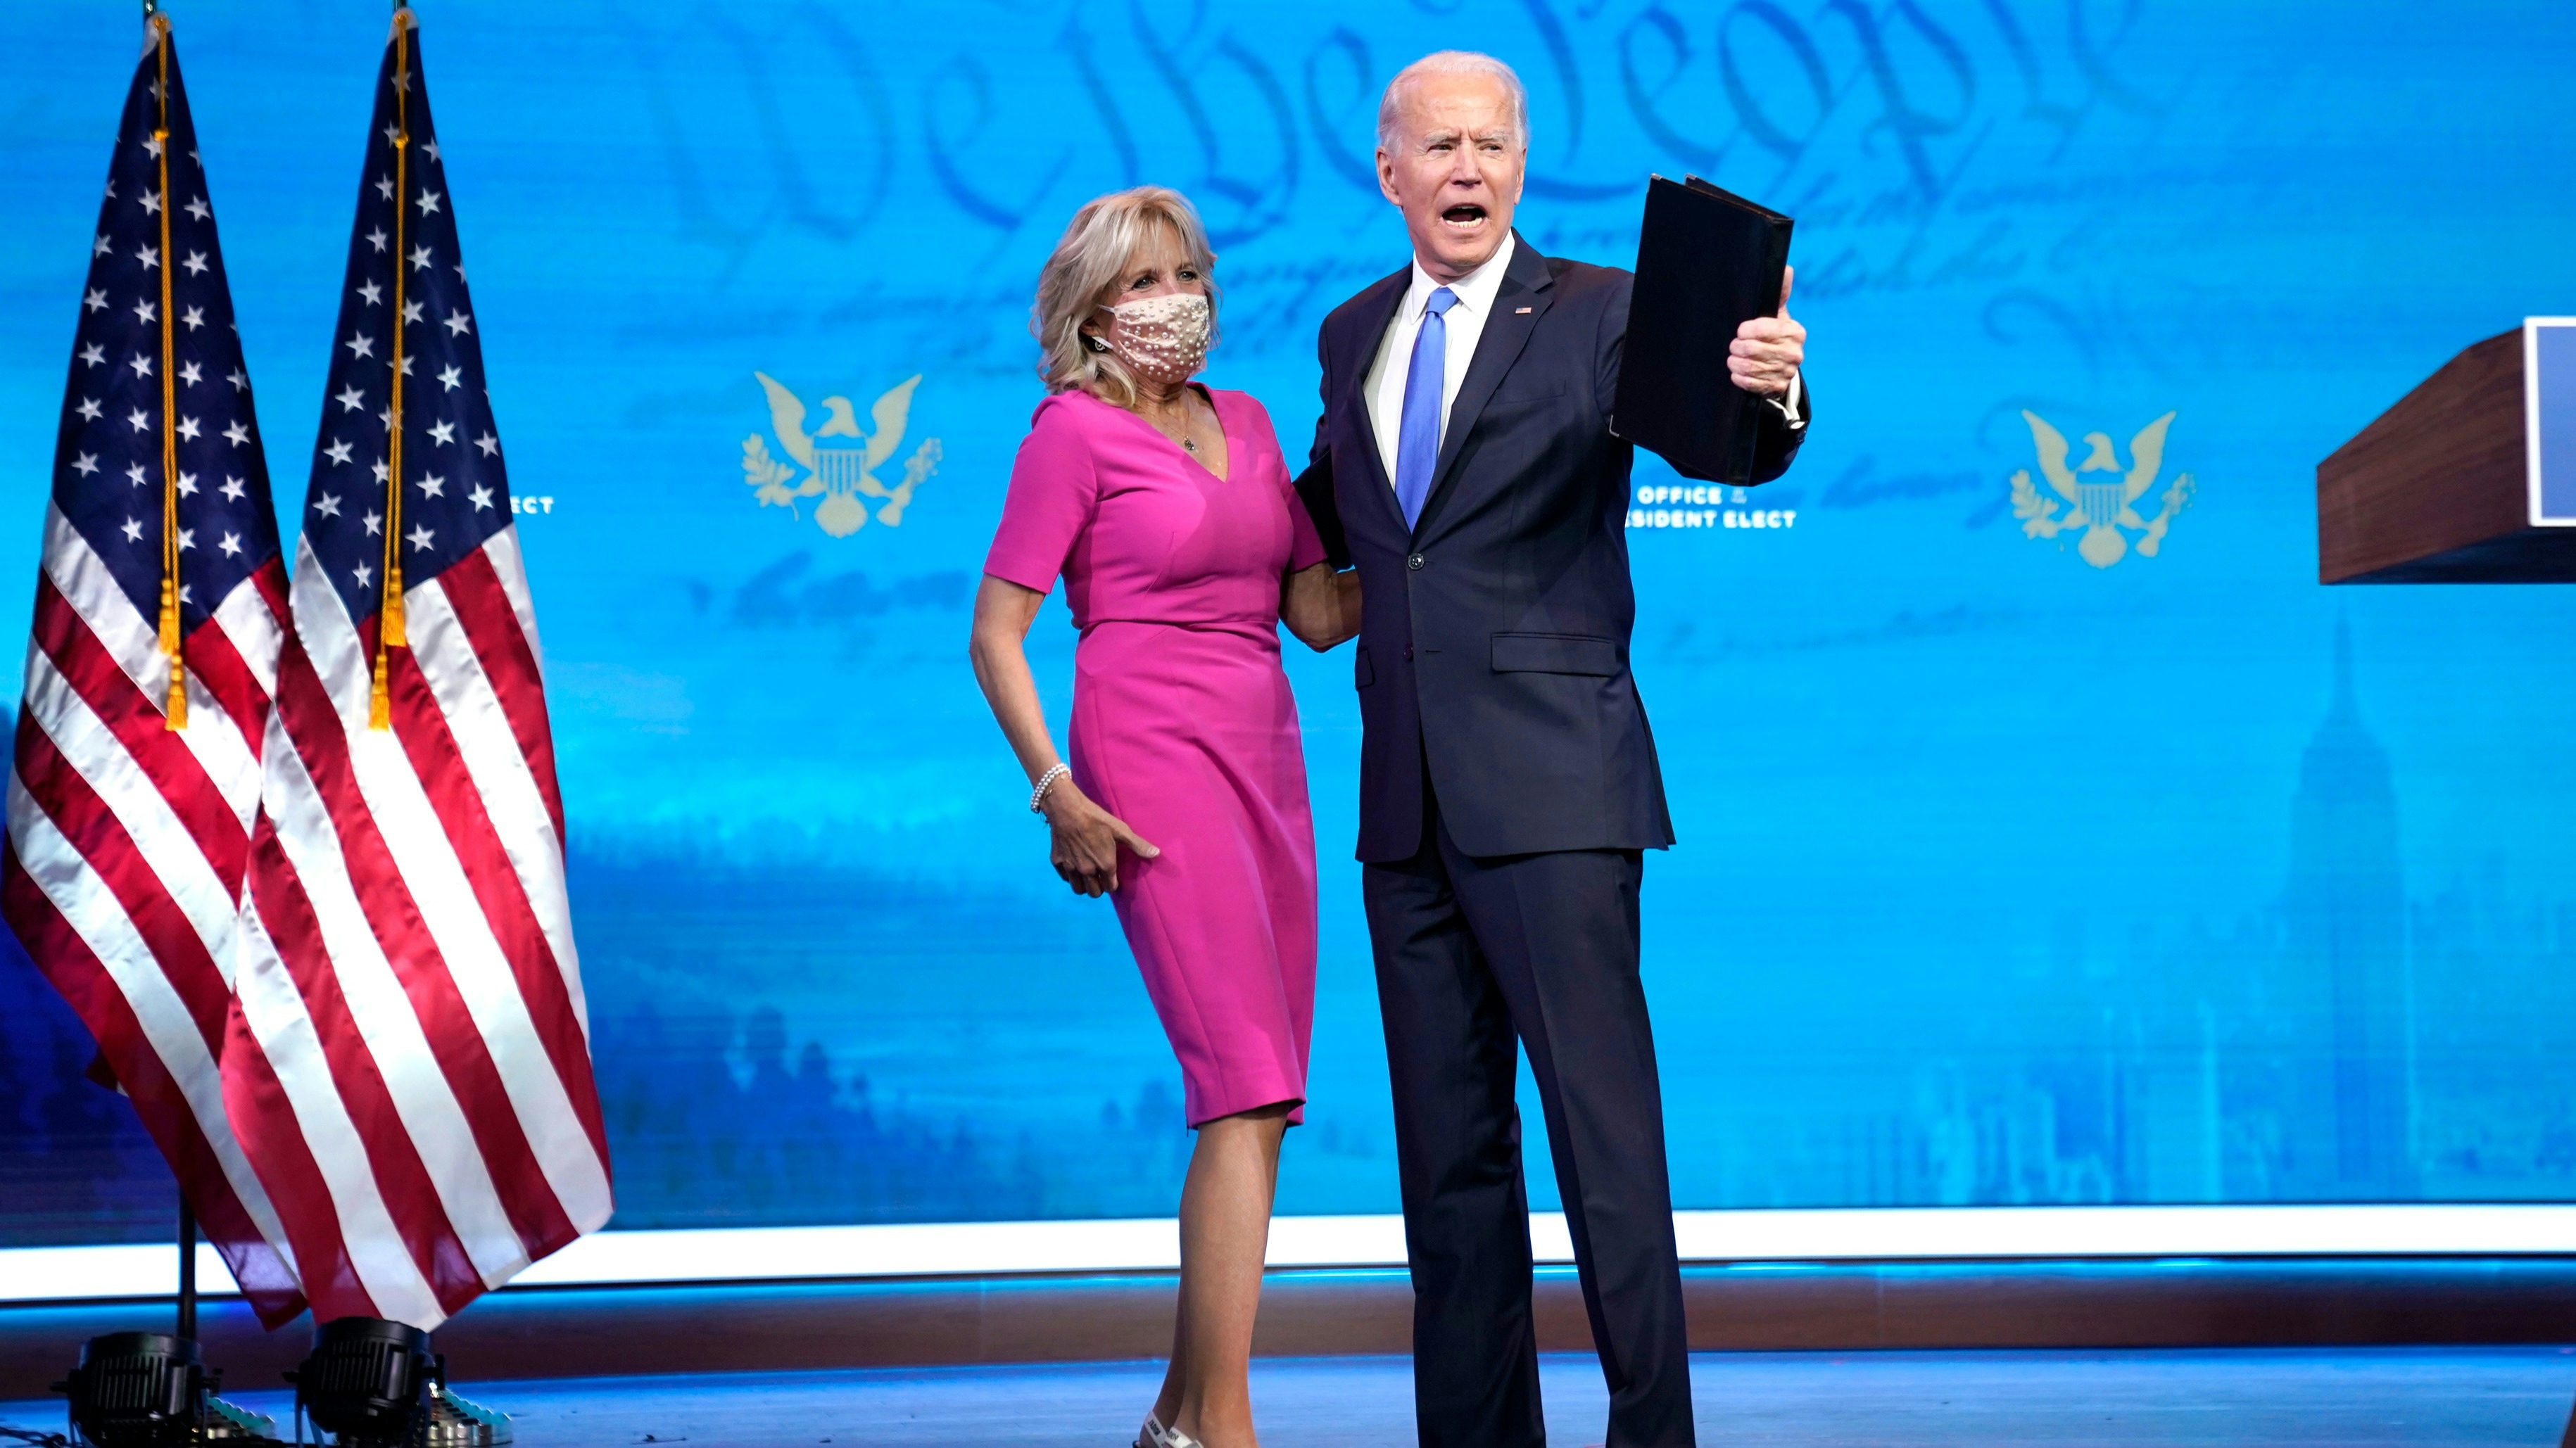 President-elect Joe Biden embraces his wife Dr. Jill Biden after speaking about the Electoral College vote. certification process at The Queen theater on December 14, 2020 in Wilmington, Delaware.